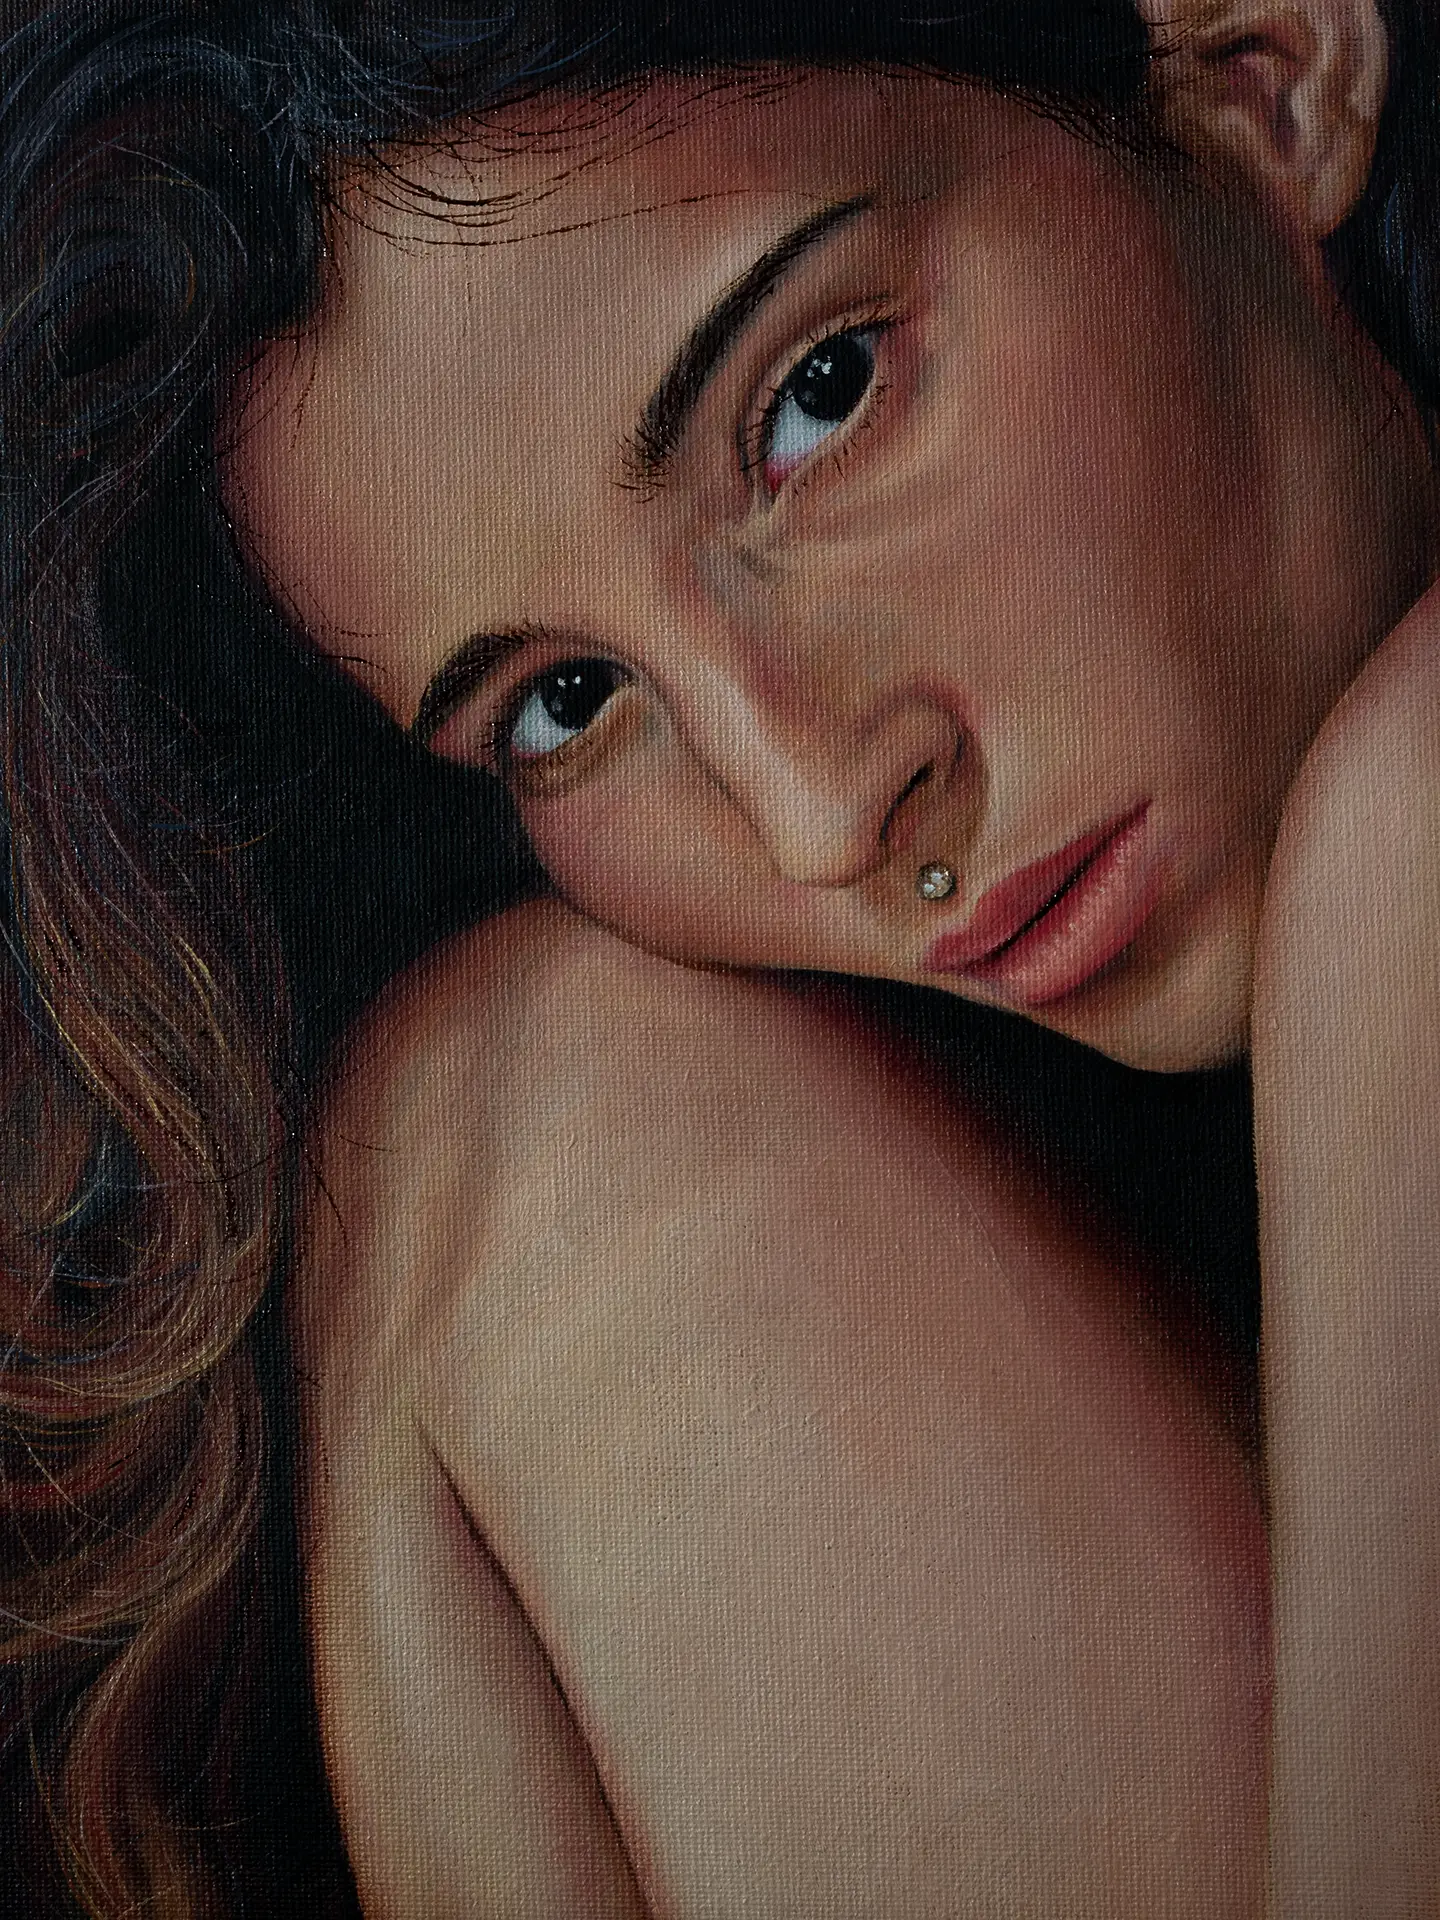 Detail of one of my oil paintings